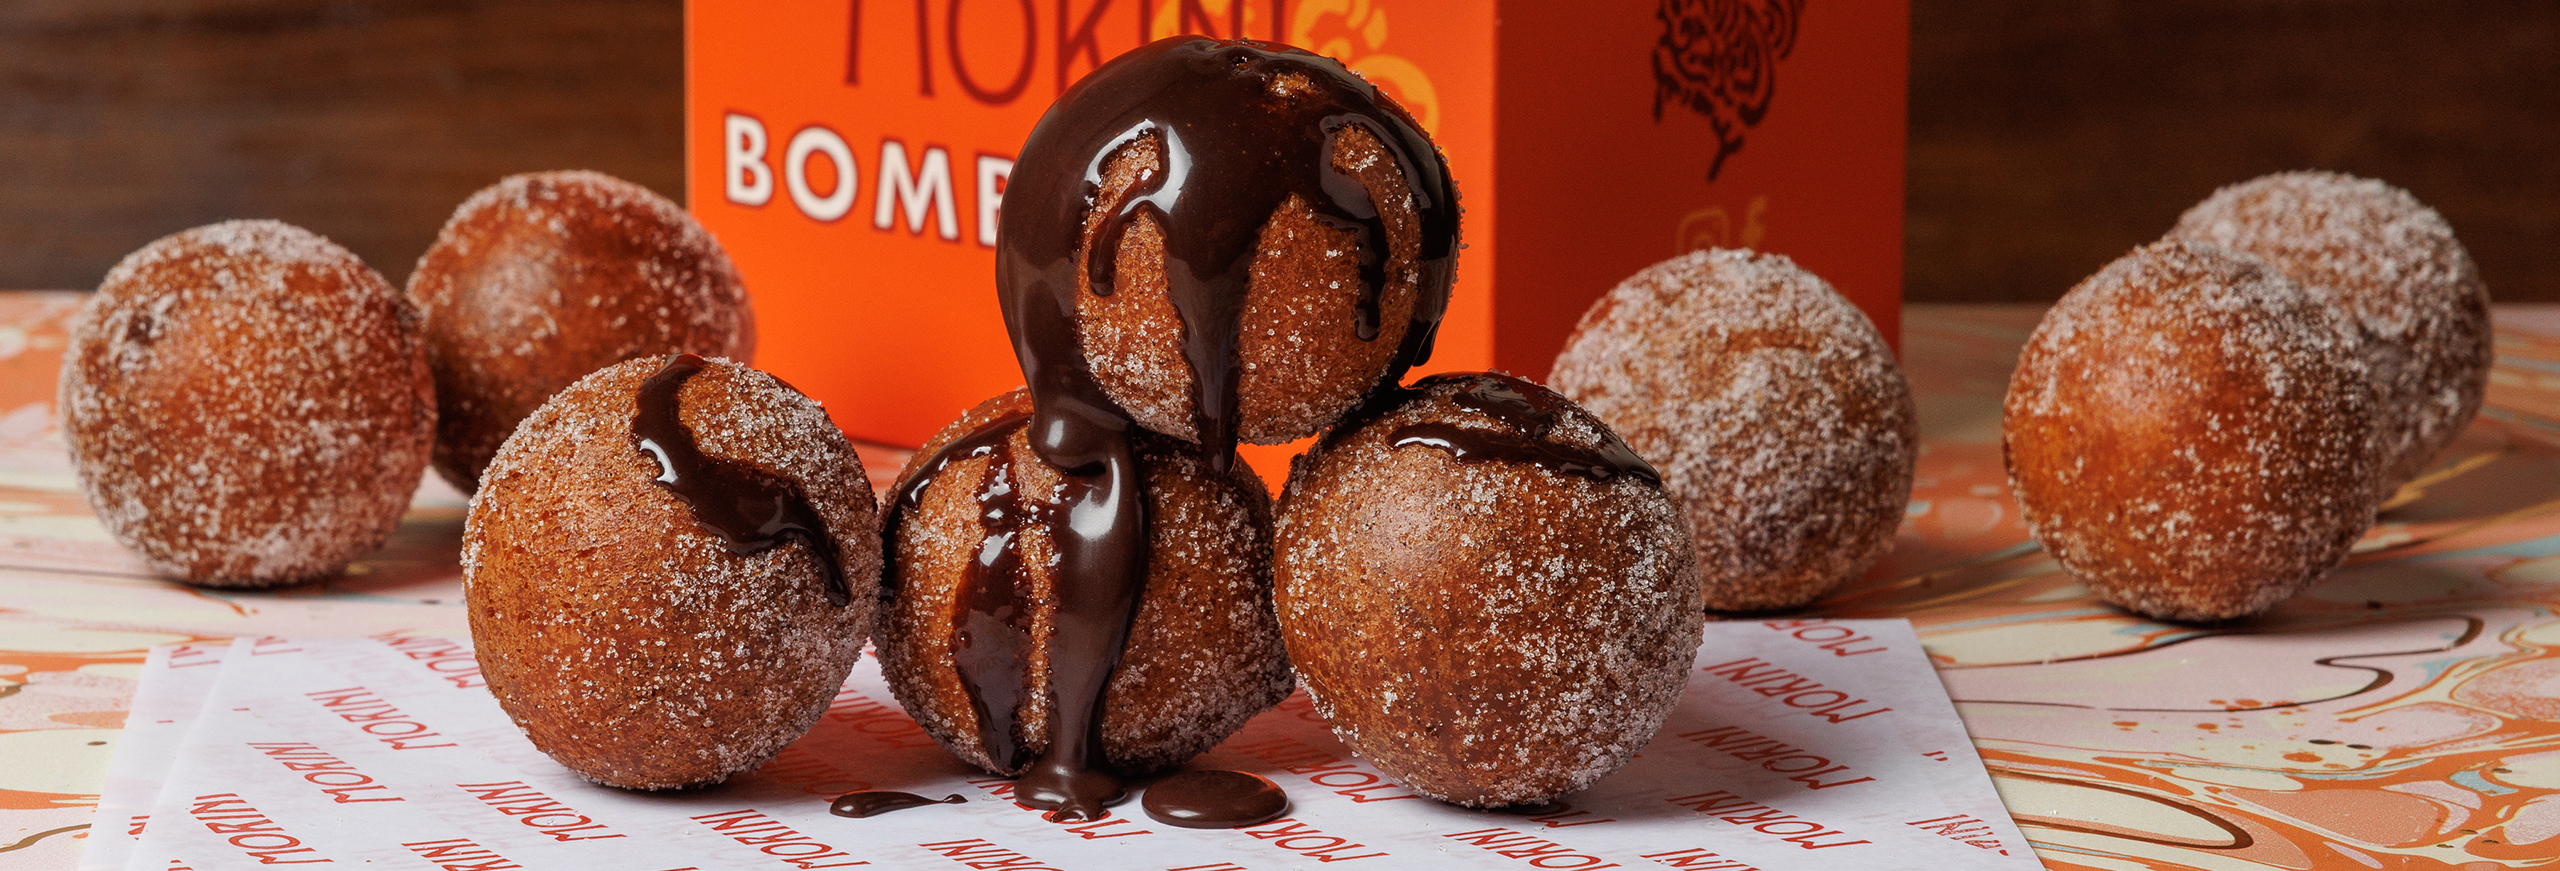 bit sized doughnuts rolled in sugar and drizzled. with chocolate